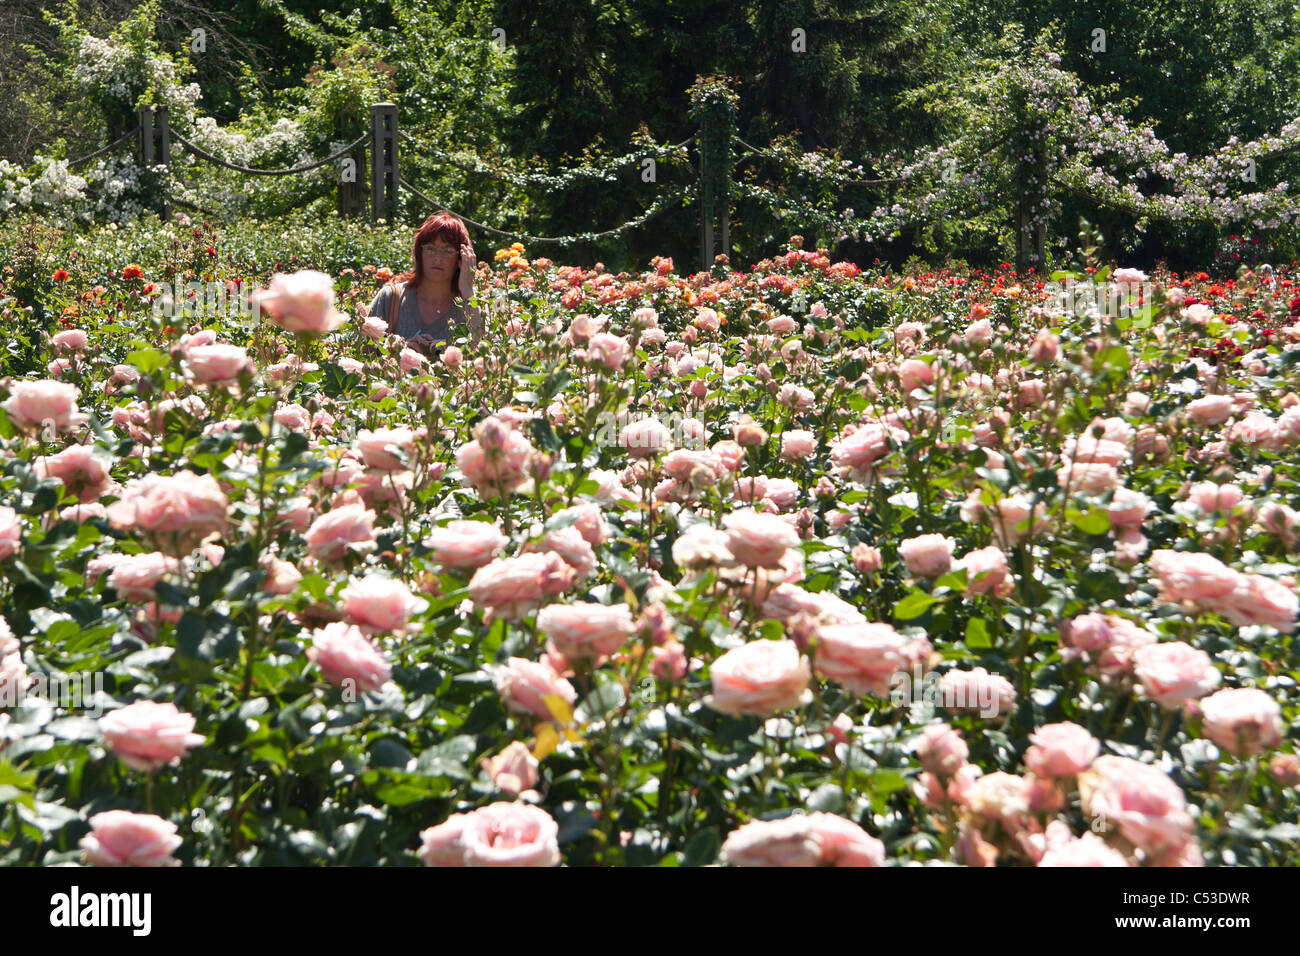 Woman in the middle of a roses garden Stock Photo